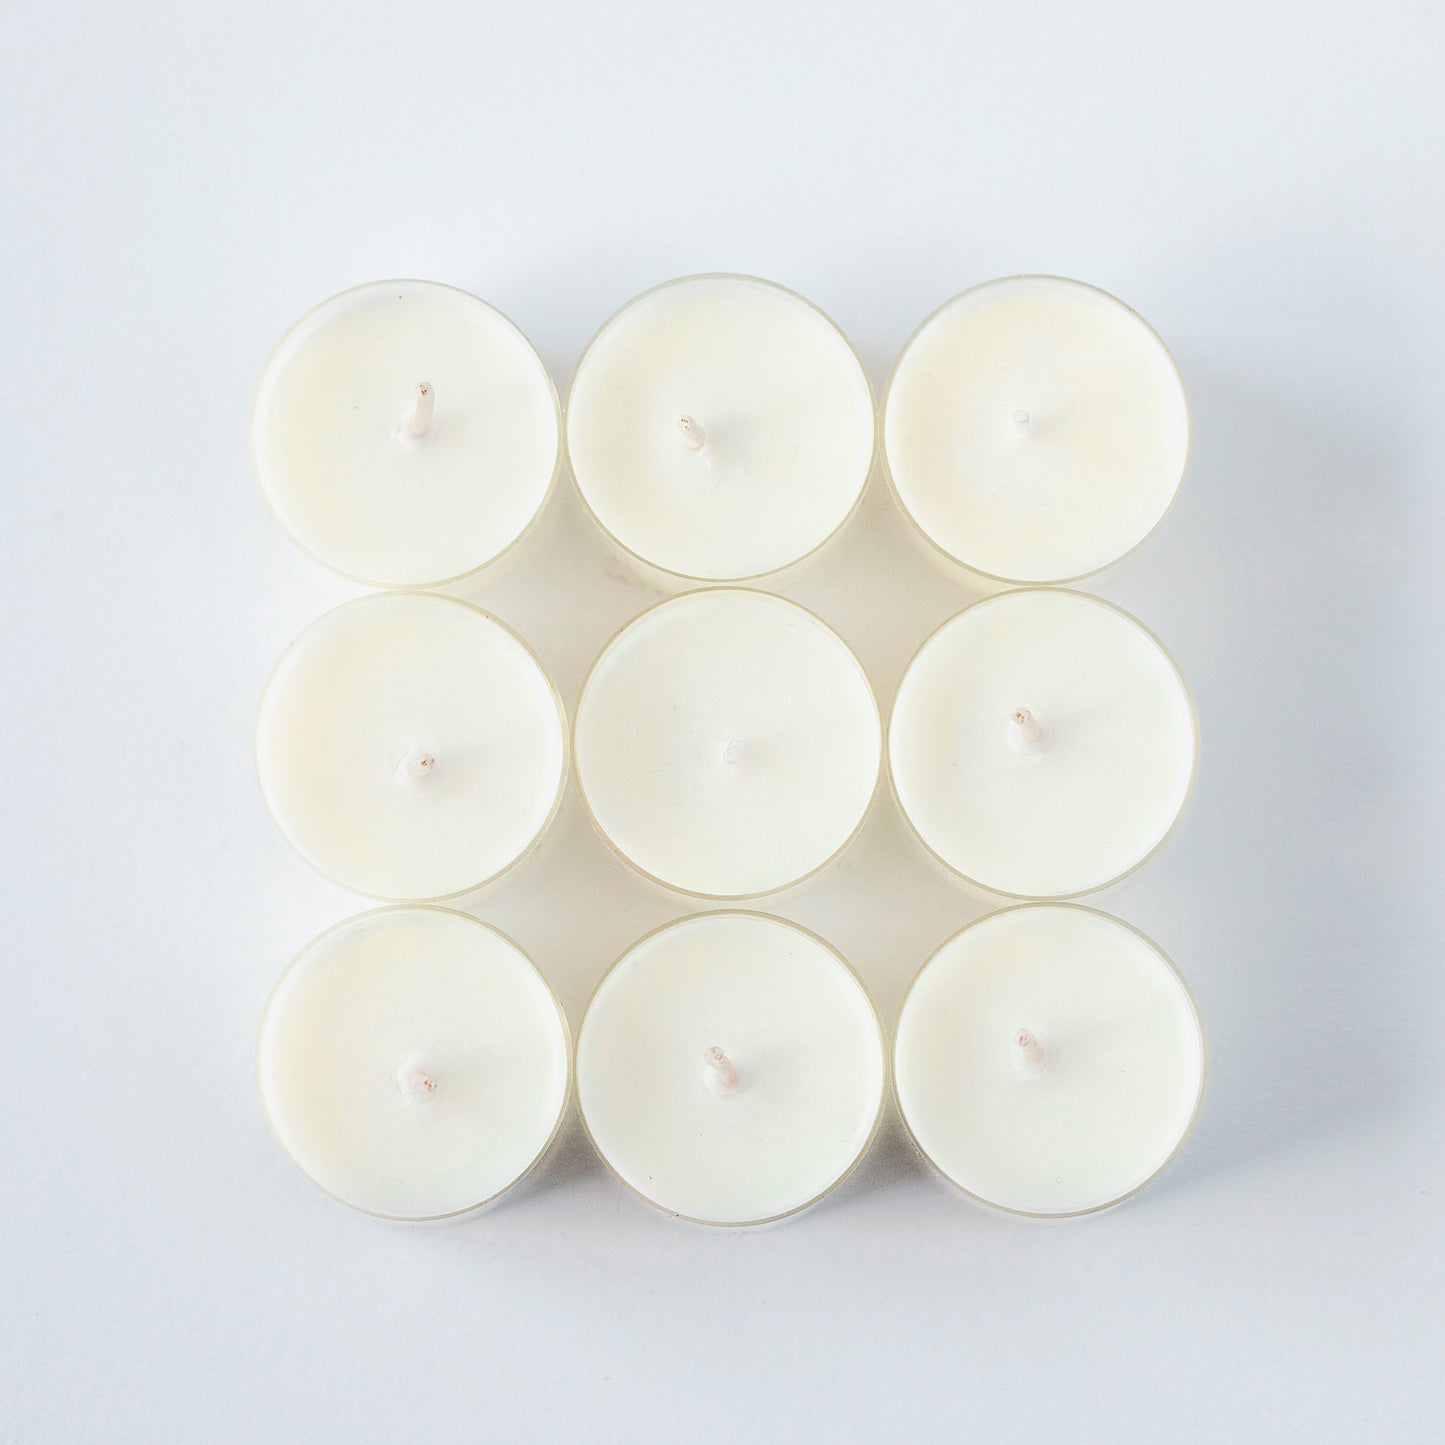 Candle Fragrances Sample Pack - Tea Candle Set of 9 - Scented Coconut Wax Tea Candles